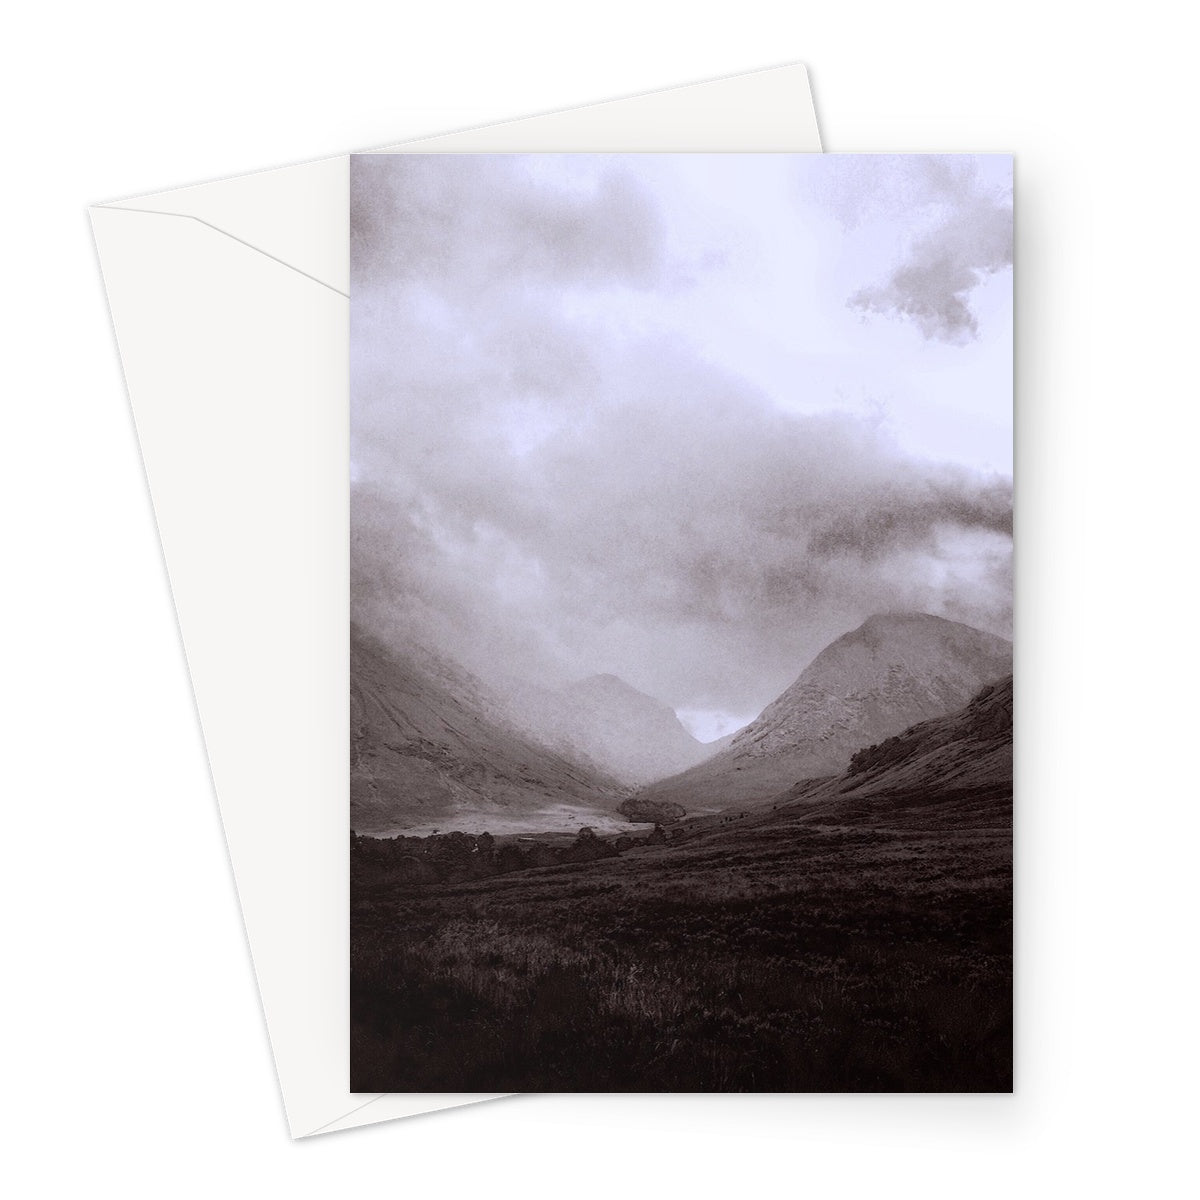 Glencoe Mist Art Gifts Greeting Card-Greetings Cards-Glencoe Art Gallery-A5 Portrait-10 Cards-Paintings, Prints, Homeware, Art Gifts From Scotland By Scottish Artist Kevin Hunter